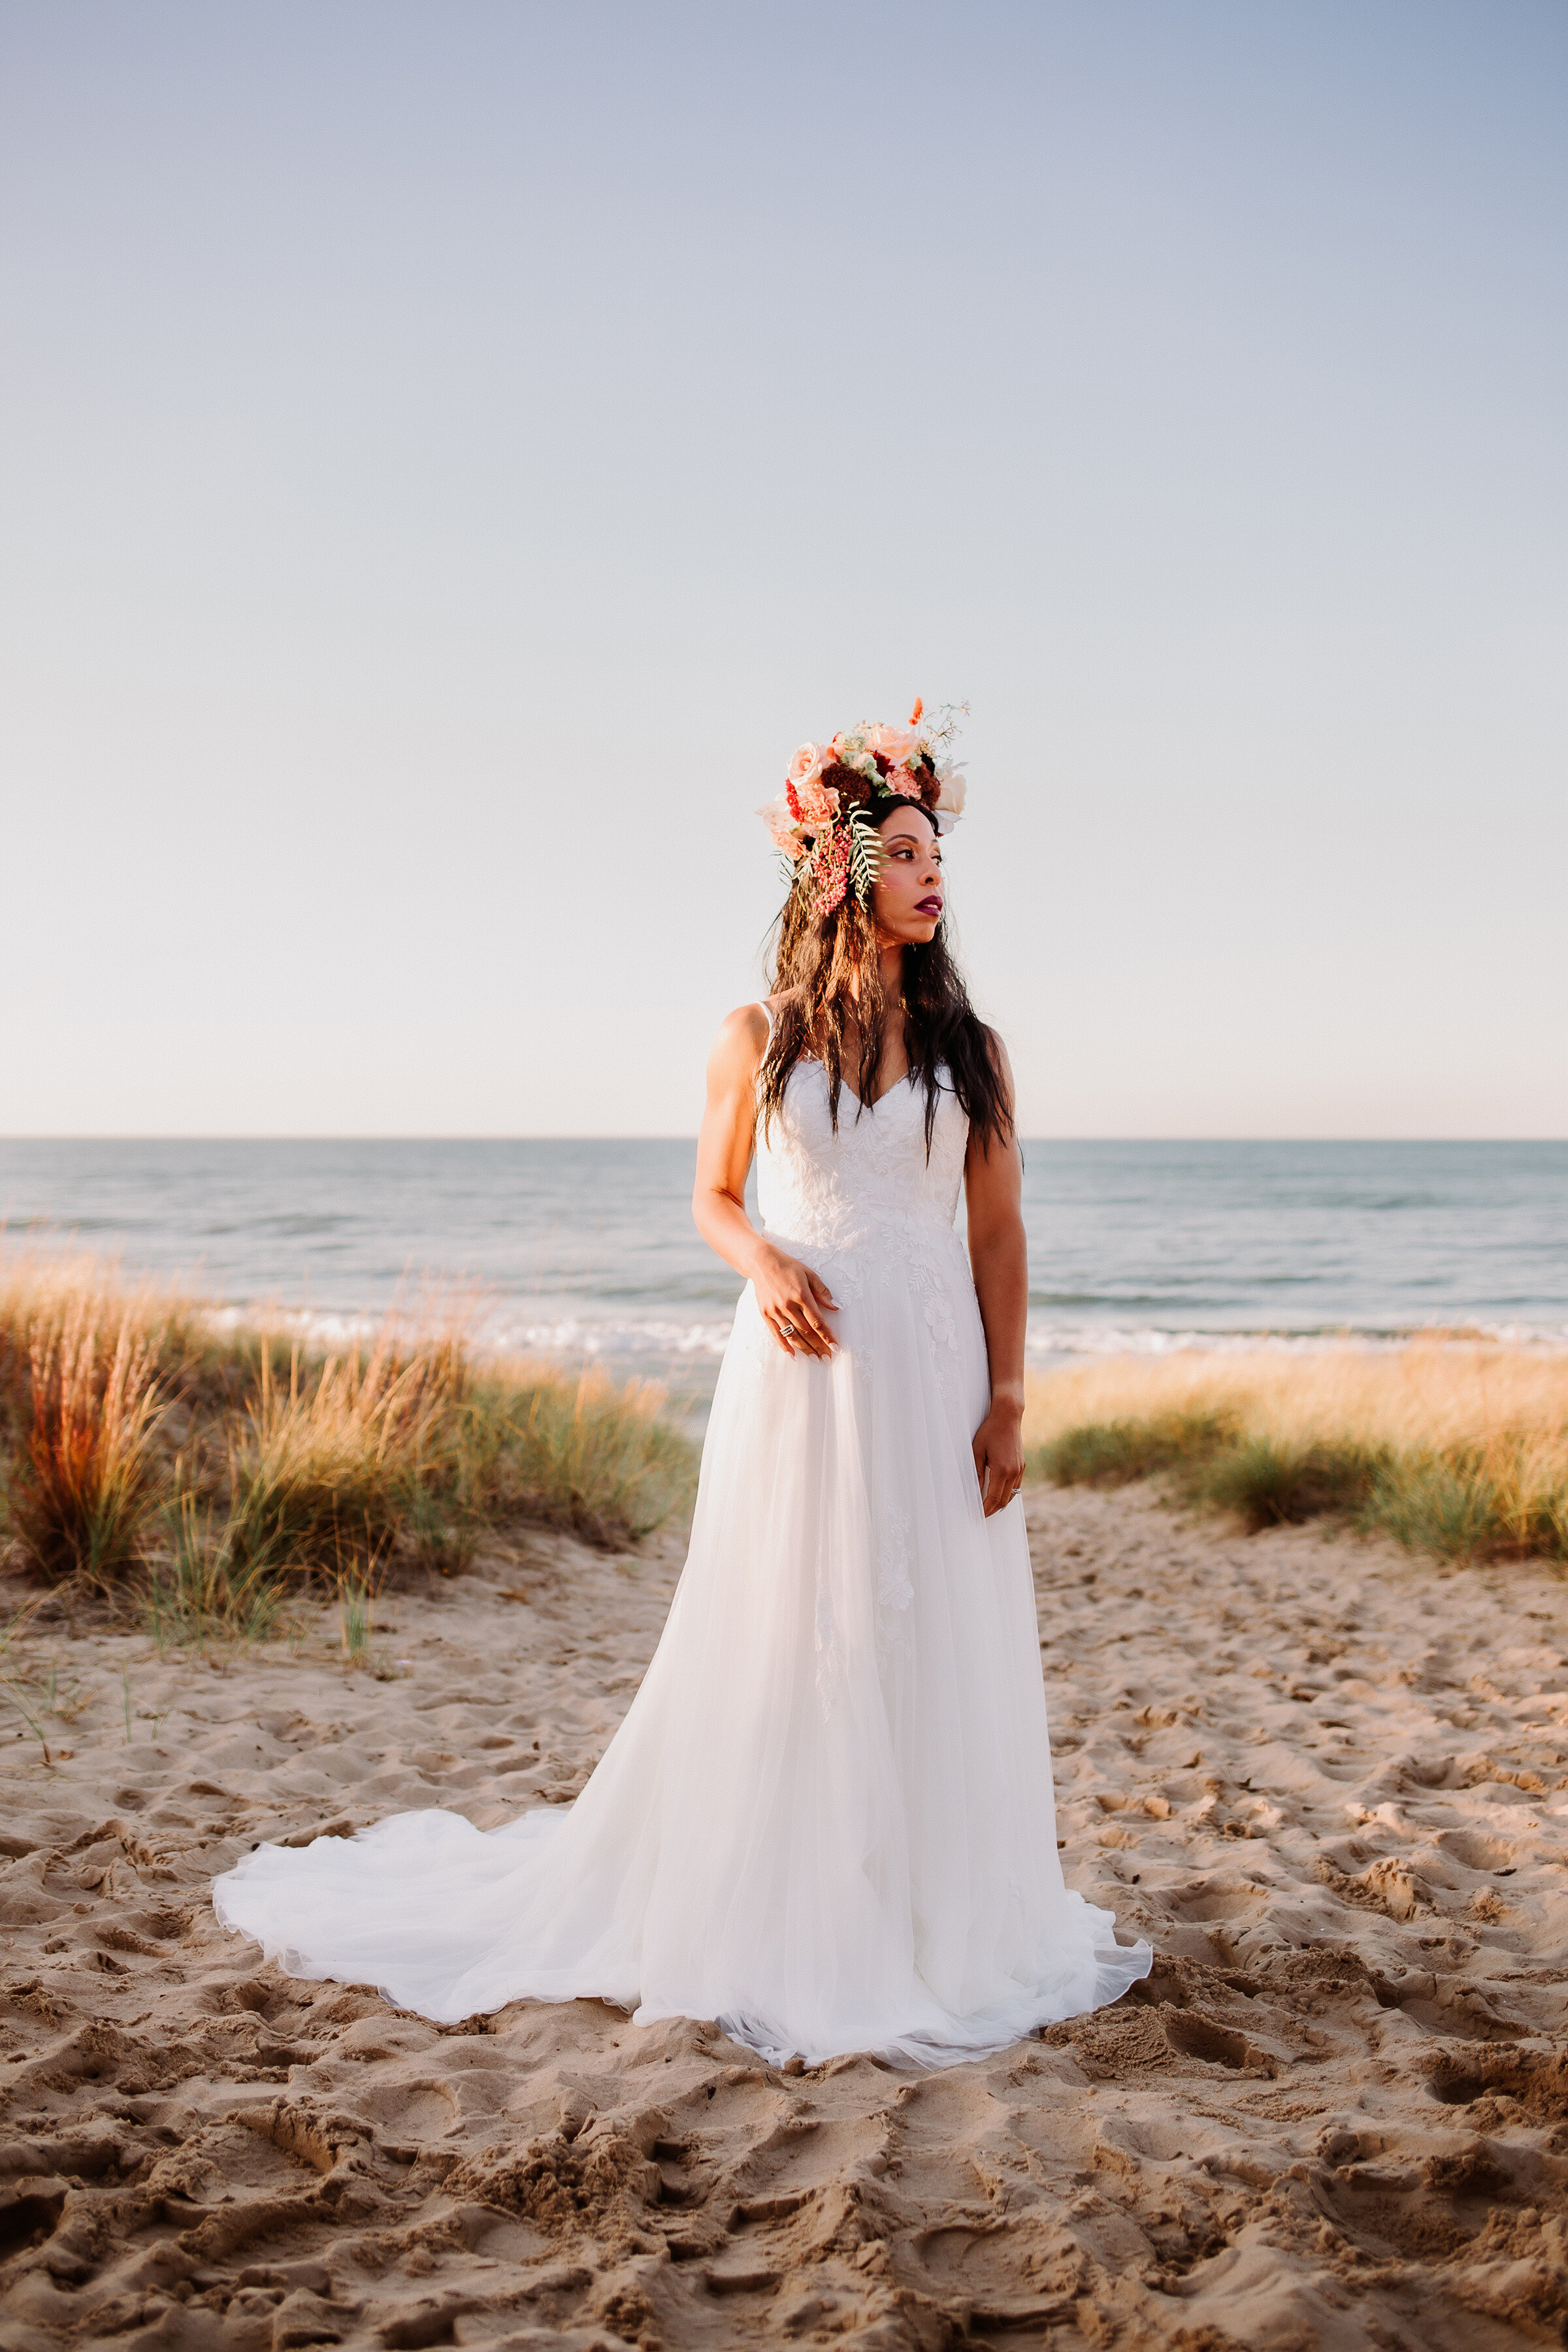  Boho bride wearing a floral headdress styled for an elopement shoot on the shores of Lake Michigan in Indiana Dunes State Park.&nbsp; Valparaiso Indiana photography Chesterton photographer Lake Michigan elopement beach wedding flowy wedding dress bo